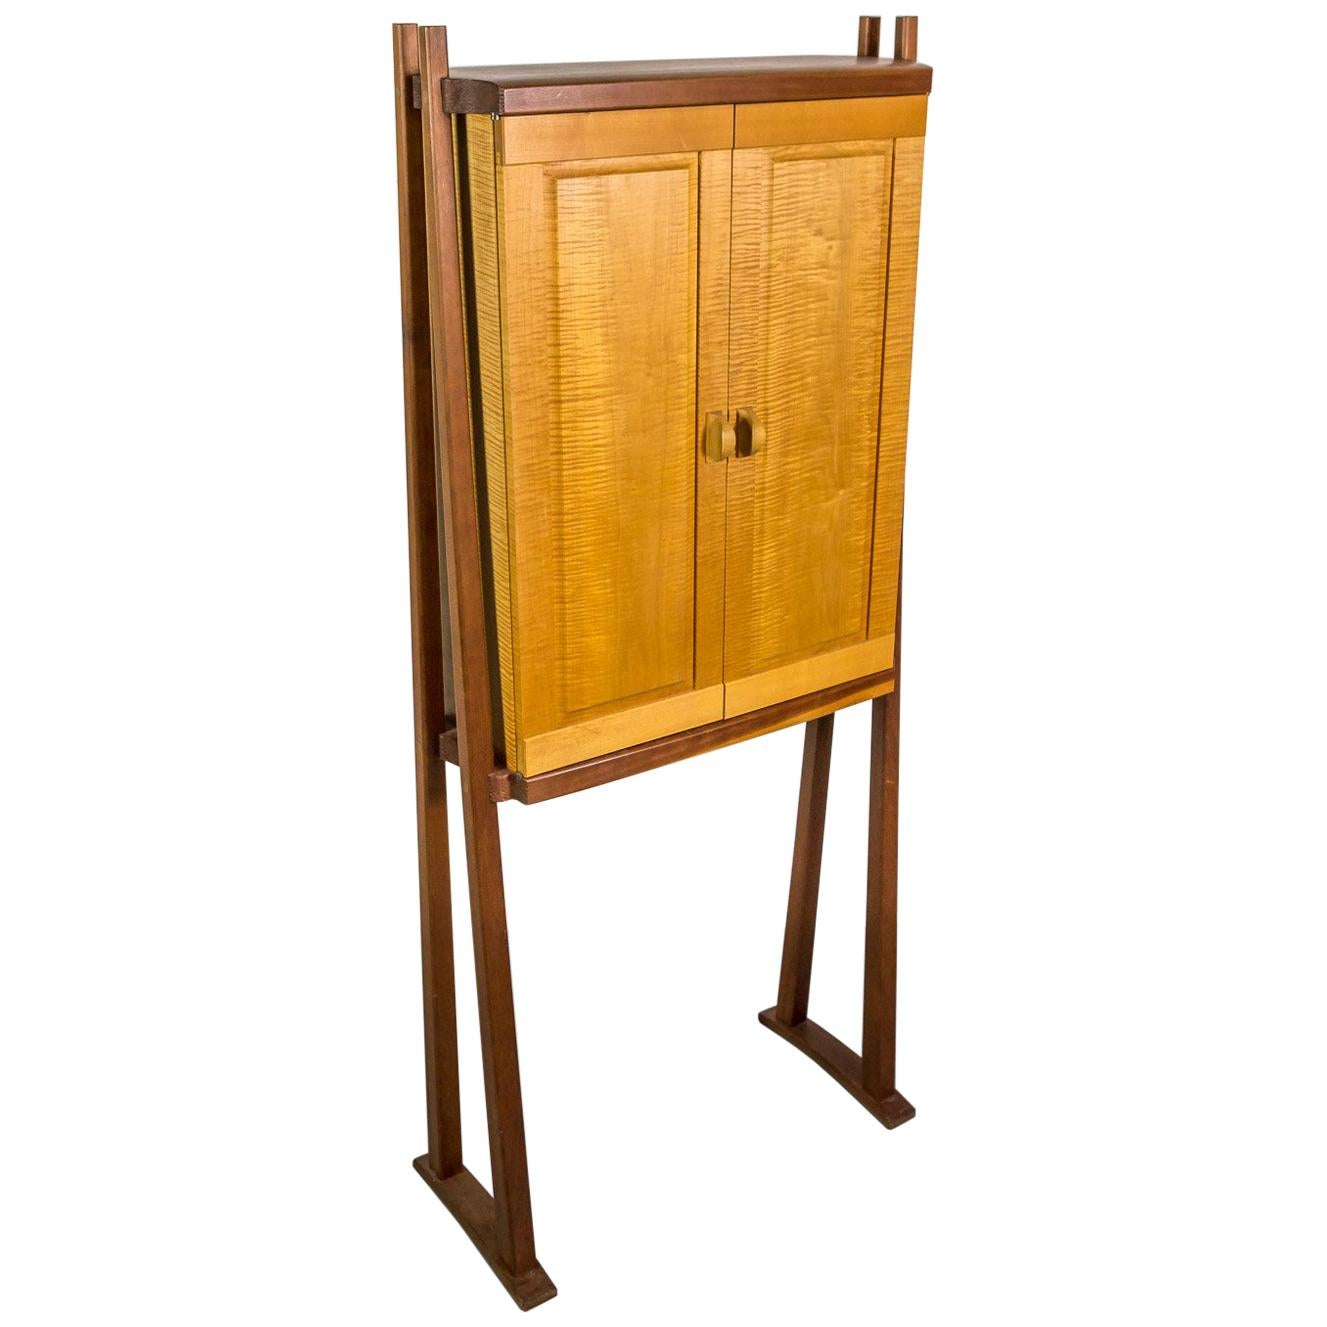 Studio Cabinet in Wood by American Craftsman Mike Bartell